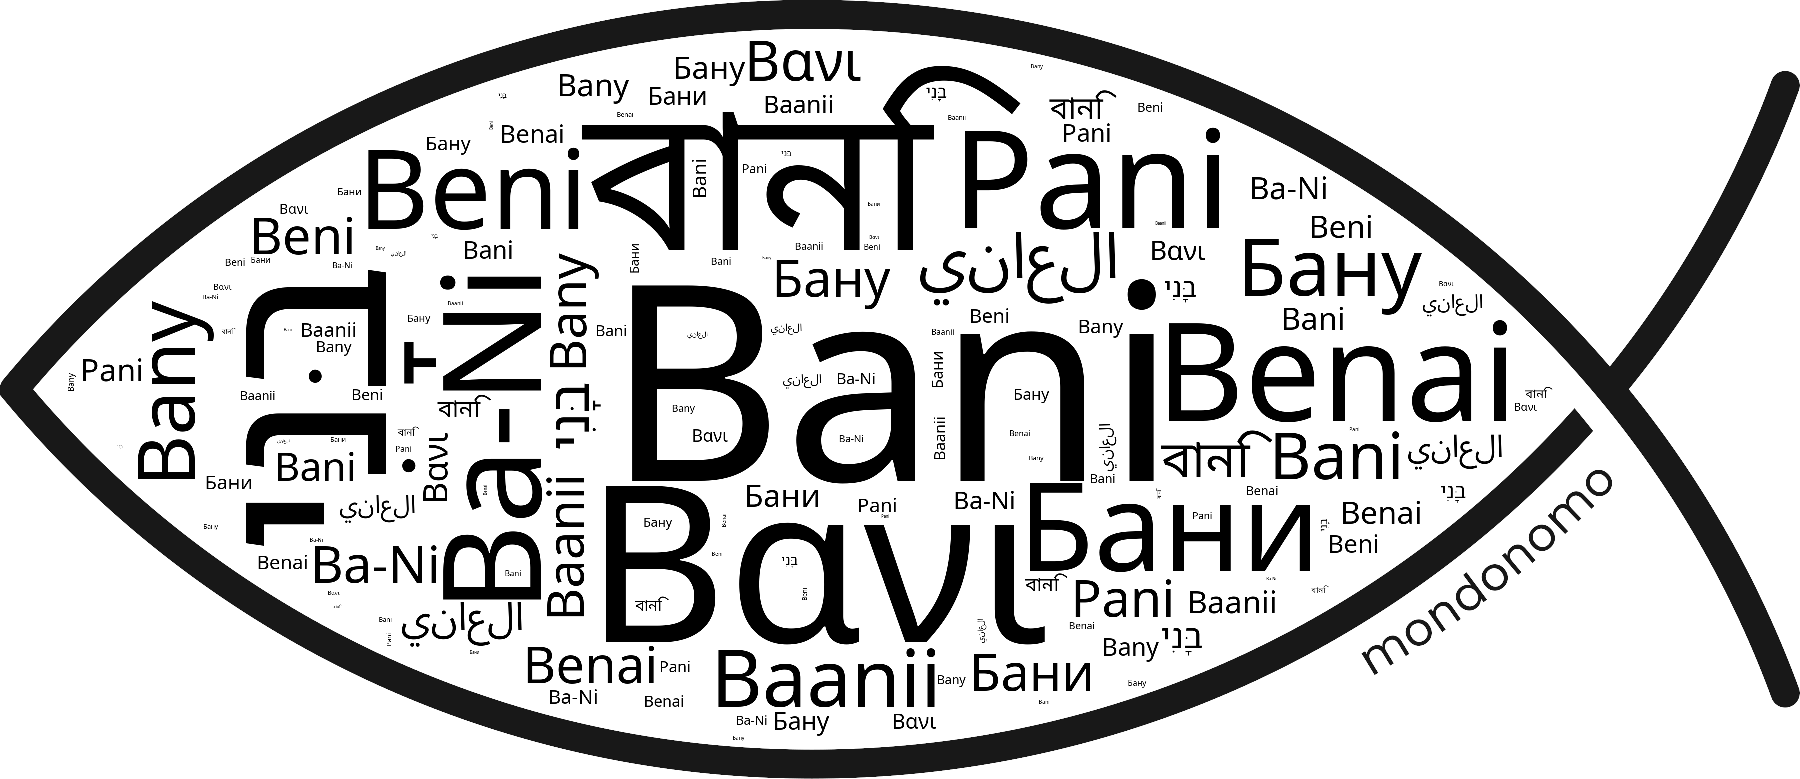 Name Bani in the world's Bibles